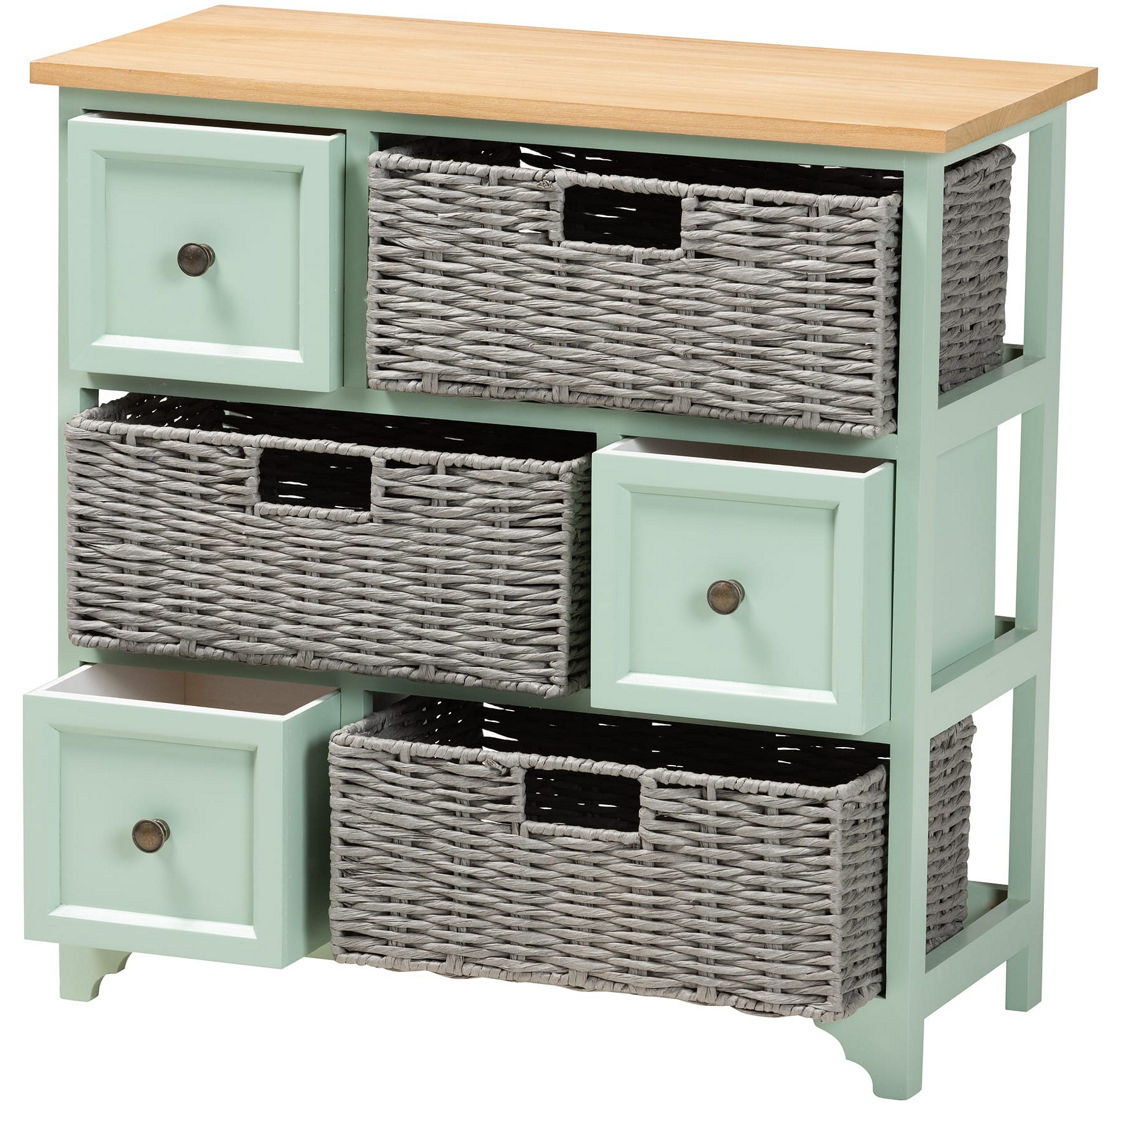 Baxton Studio Valtina Oak Brown and Mint Green 3-Drawer Storage Unit with Baskets - Image 2 of 5